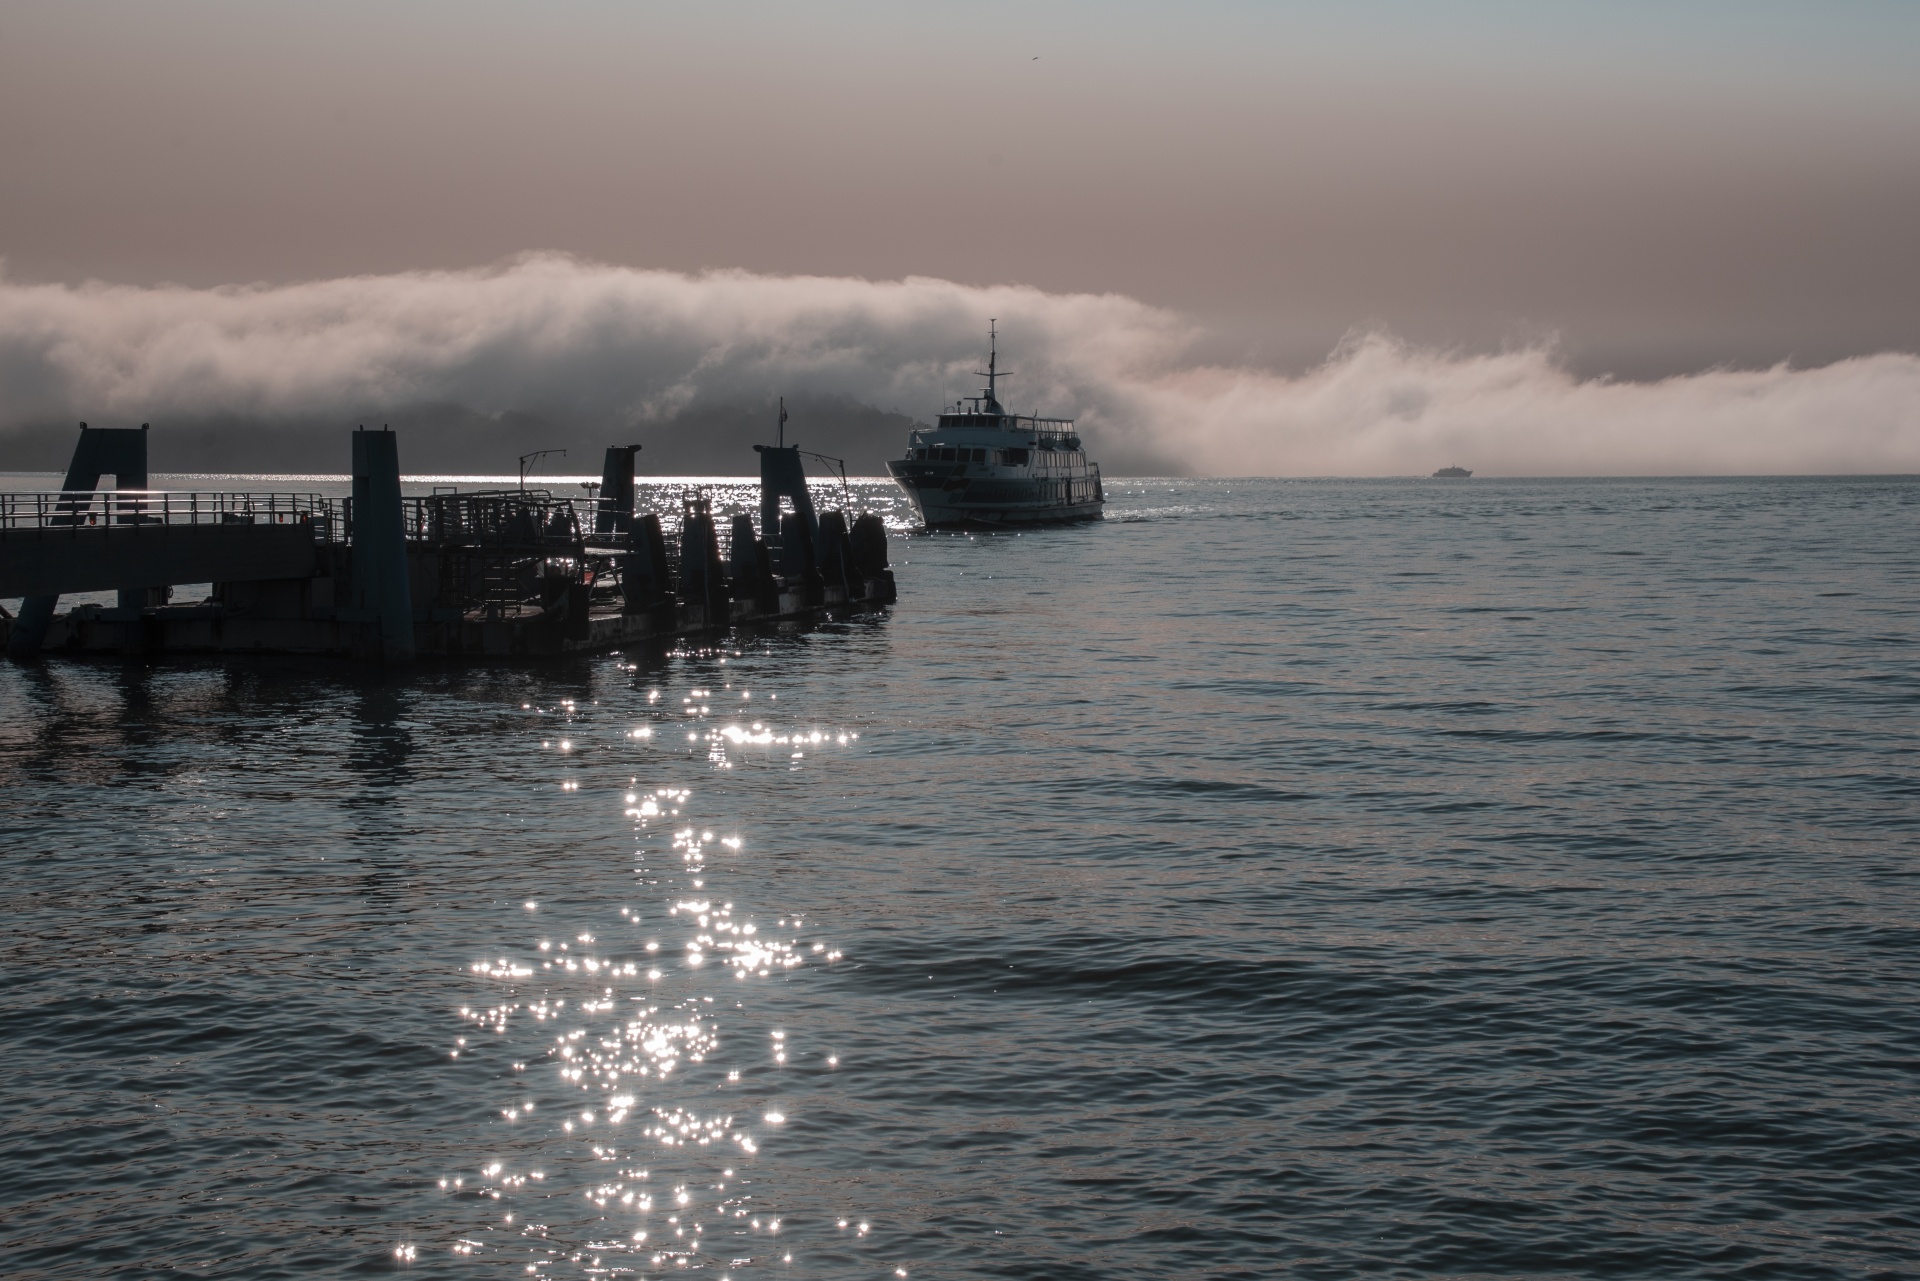 Sausalito pier ferry boat landing shows the morning ferry arriving to pick up passengers. Free image for personal or commercial projects